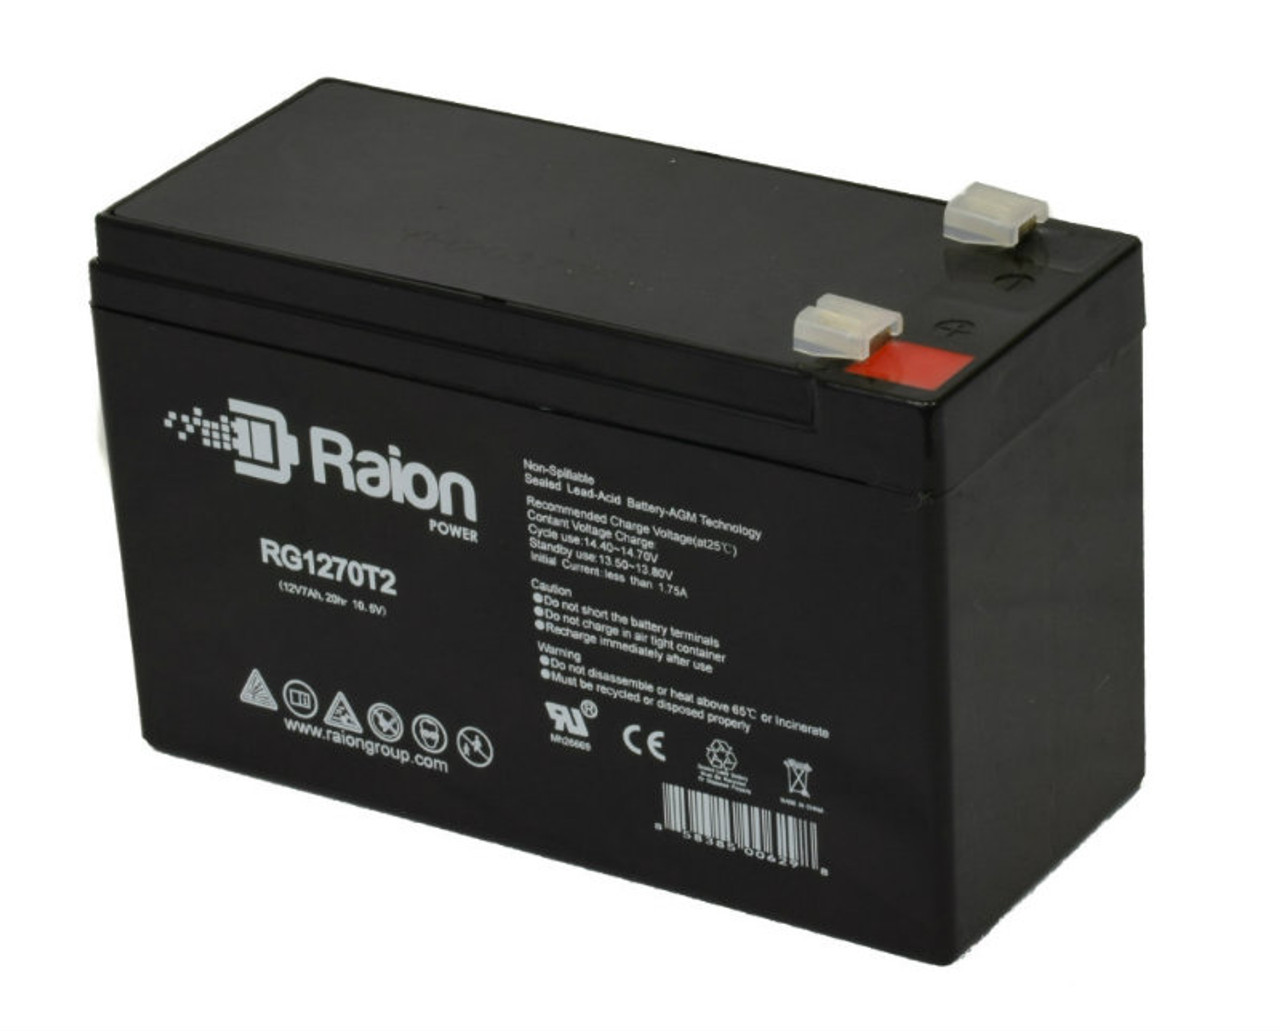 Raion Power Replacement 12V 7Ah RG1270T1 Fire Alarm Battery for GE Security Alarm Caddx/NetworX NX-8E